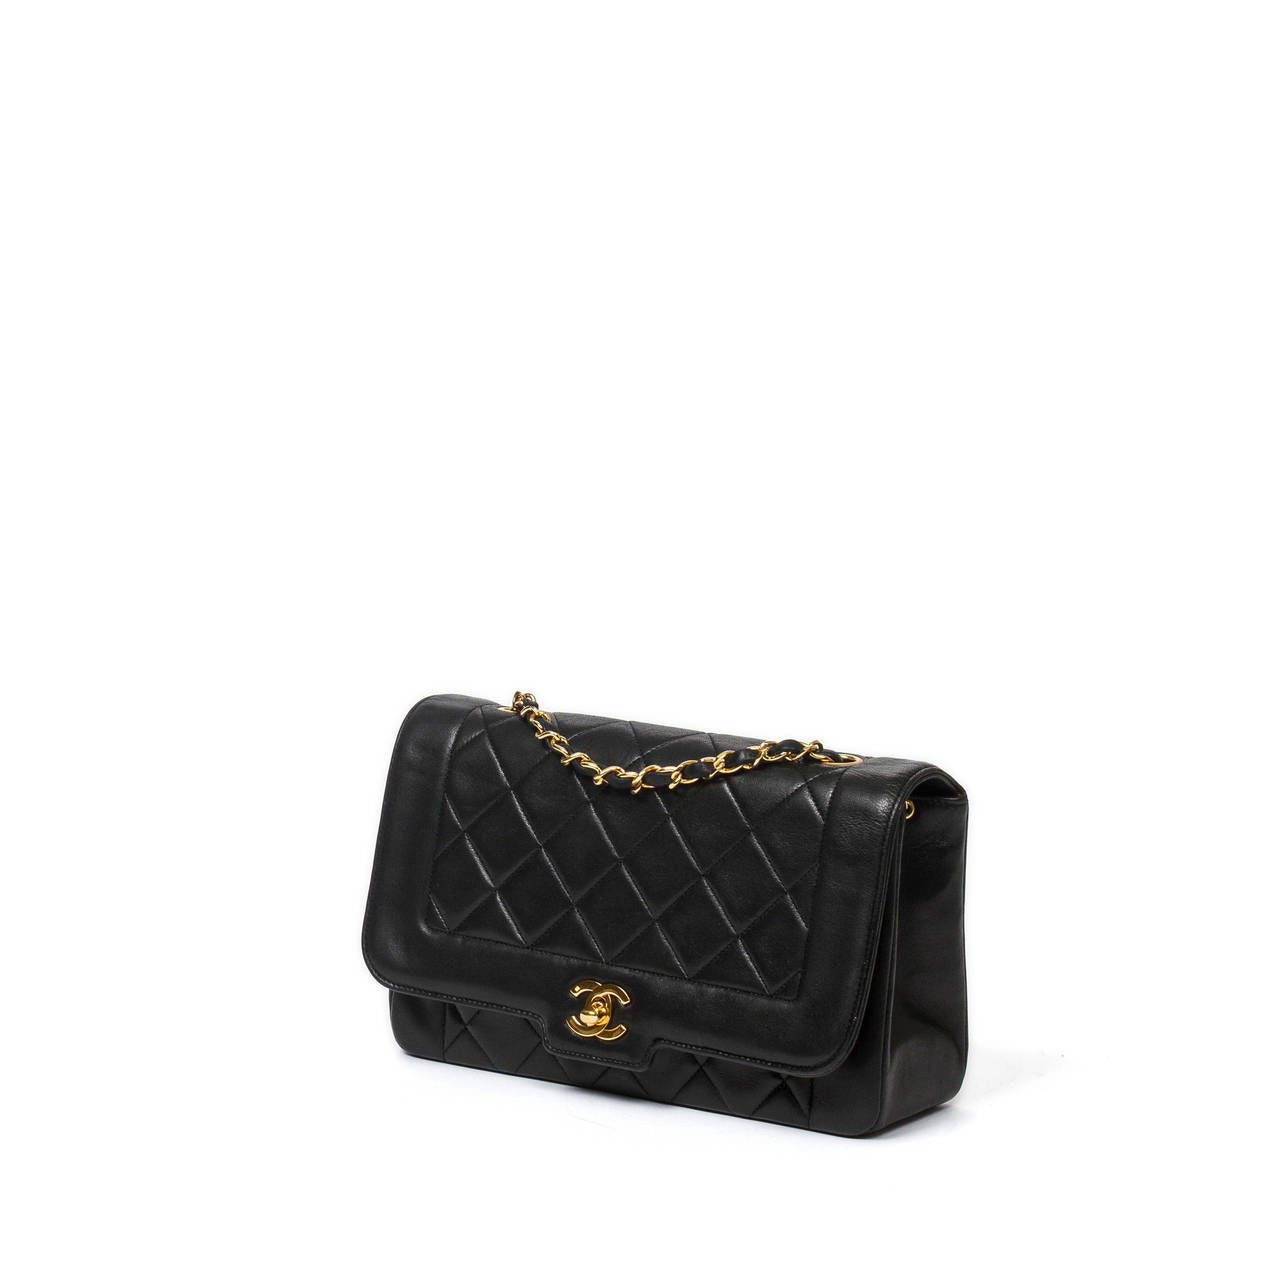 Chanel Vintage single flap 25cm in black quilted leather with double chain strap interlaced black leather (drop 49cm), CC turnlock and gold tone hardware. Burgundy leather interior with 3 slip pockets and one zipped. Authenticity card and sticker